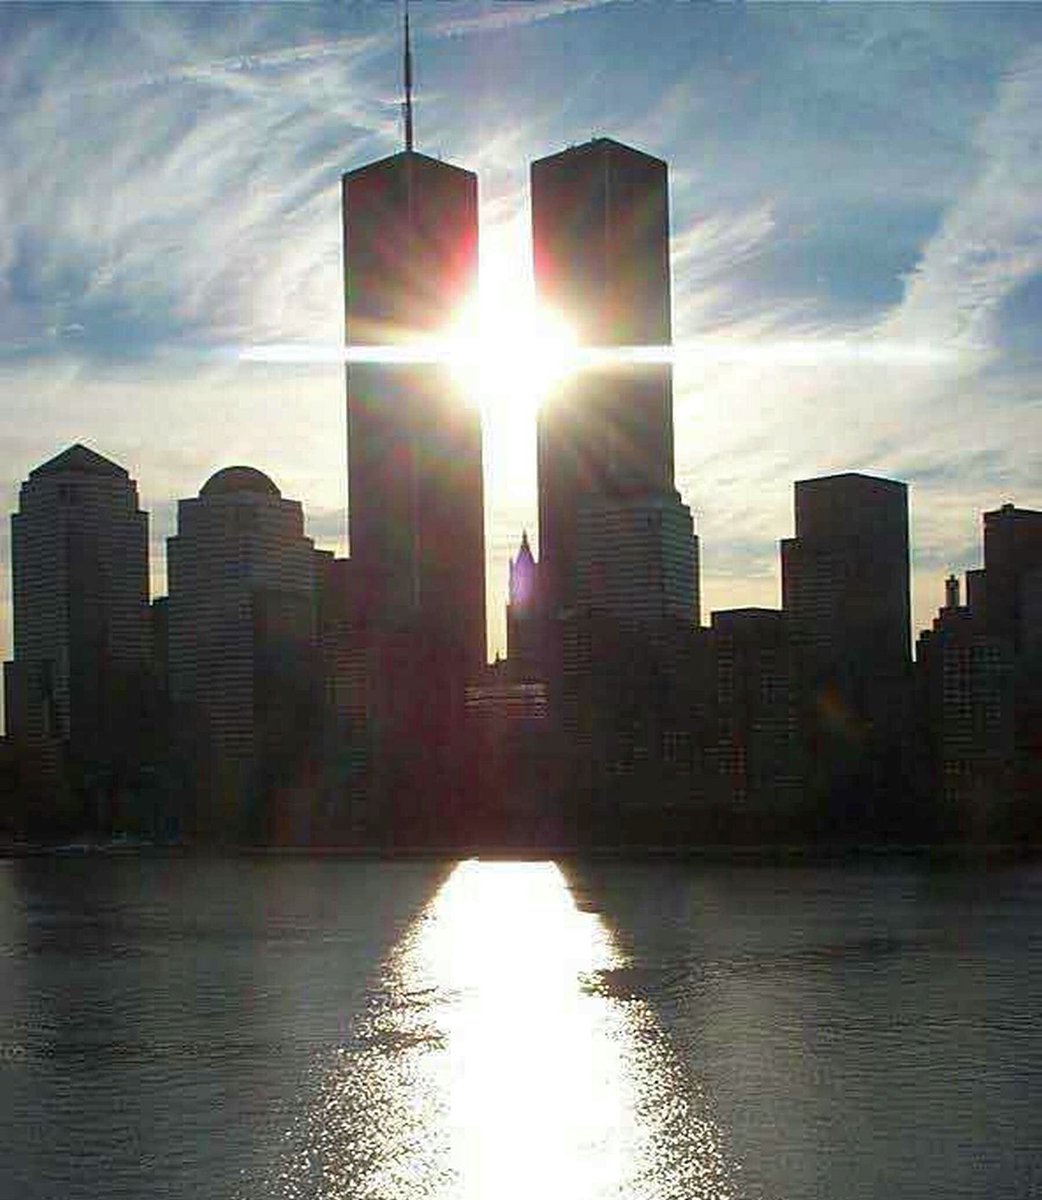 15 years later, #NeverForget ❤️

https://t.co/2n8HbOiu9e https://t.co/opCdwF16gN